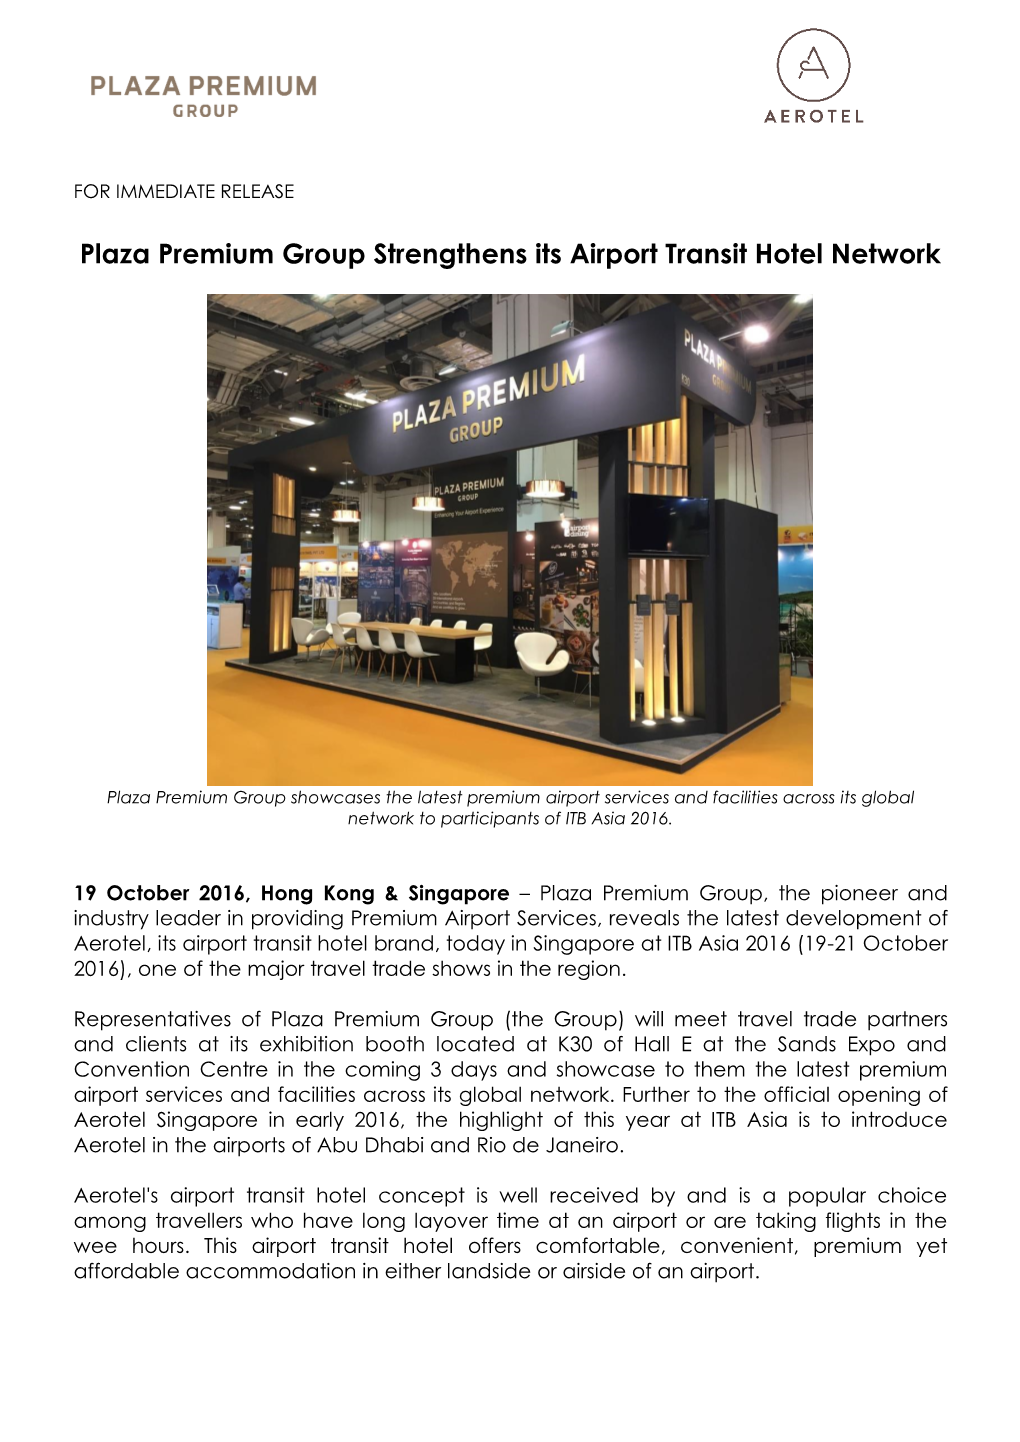 Plaza Premium Group Strengthens Its Airport Transit Hotel Network